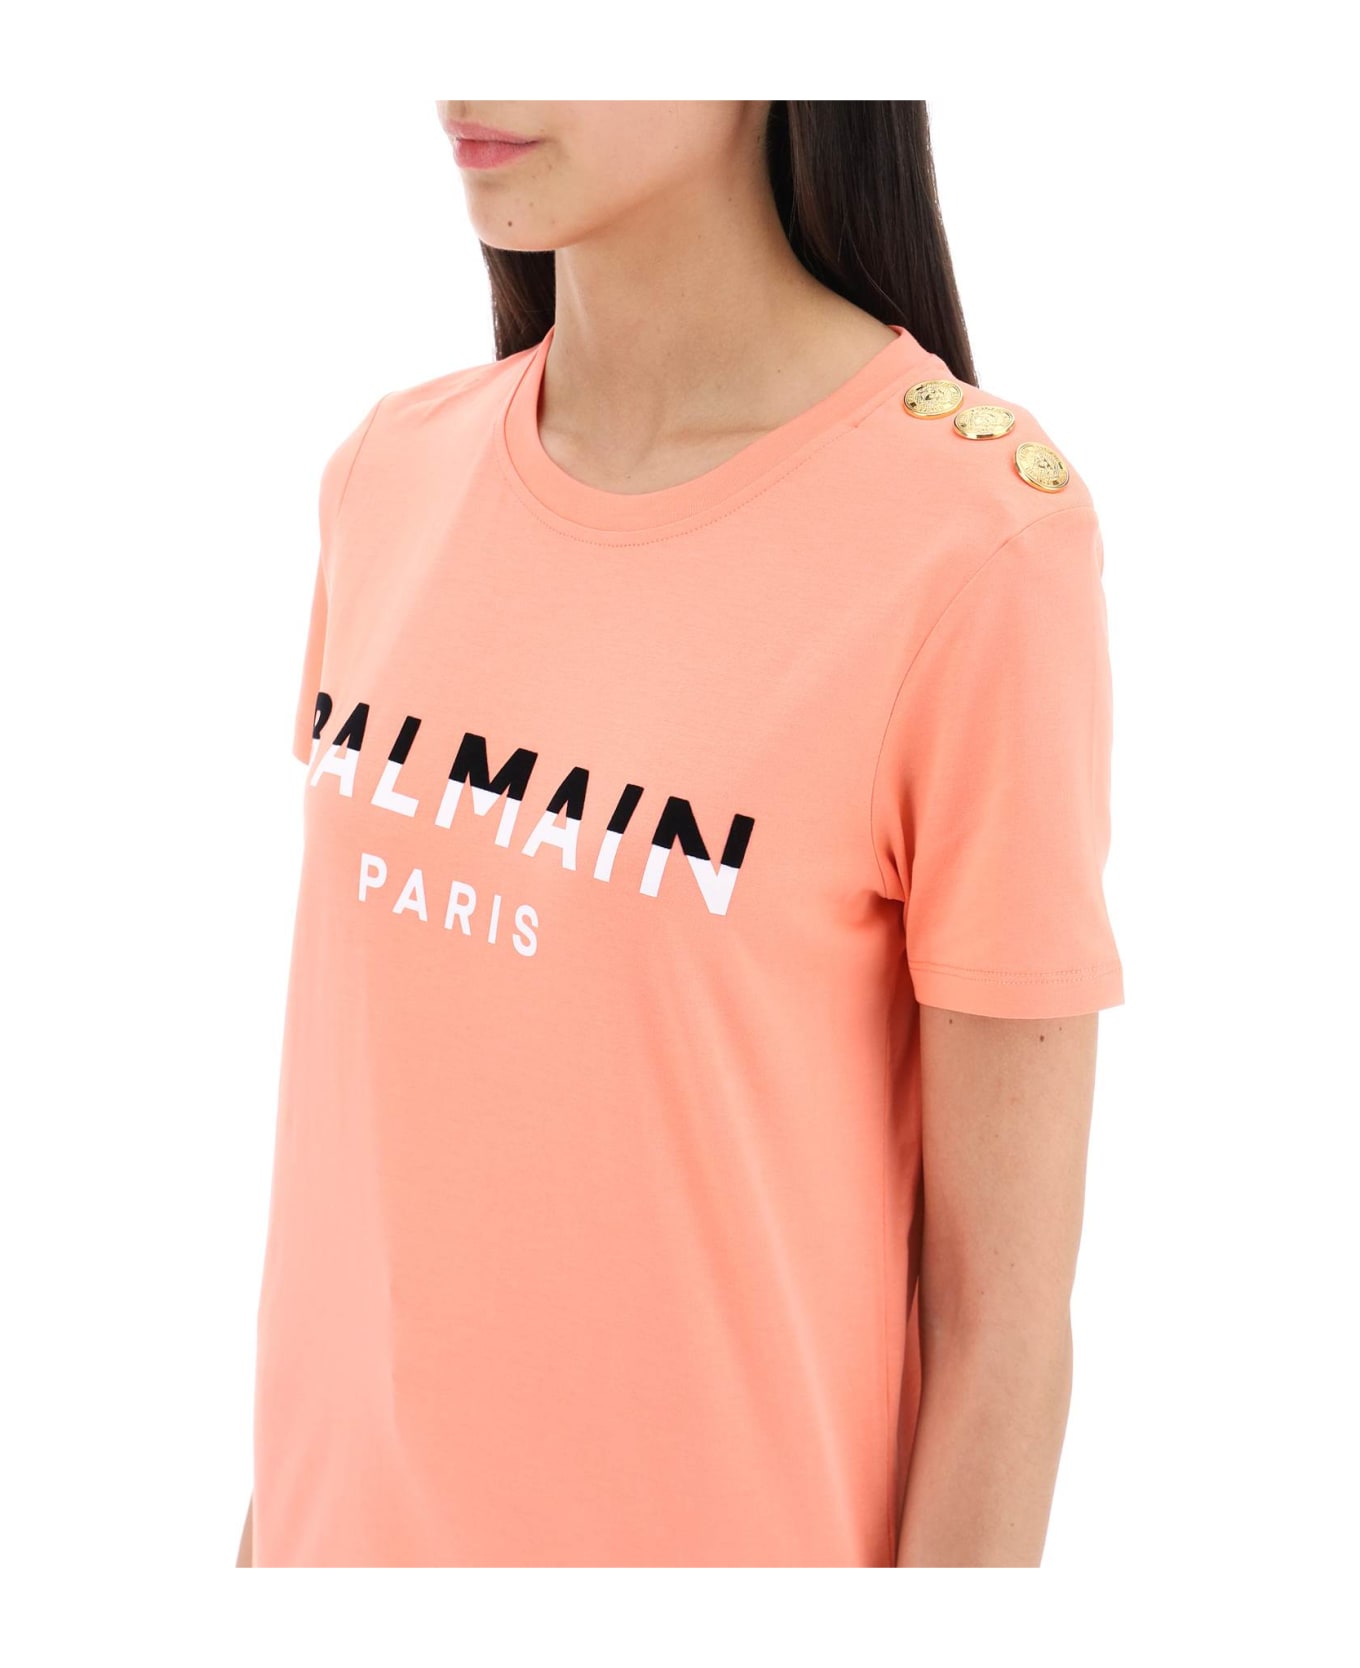 Balmain T-shirt With Flocked Print And Gold-tone Buttons - SAUMON NOIR BLANC (Pink)